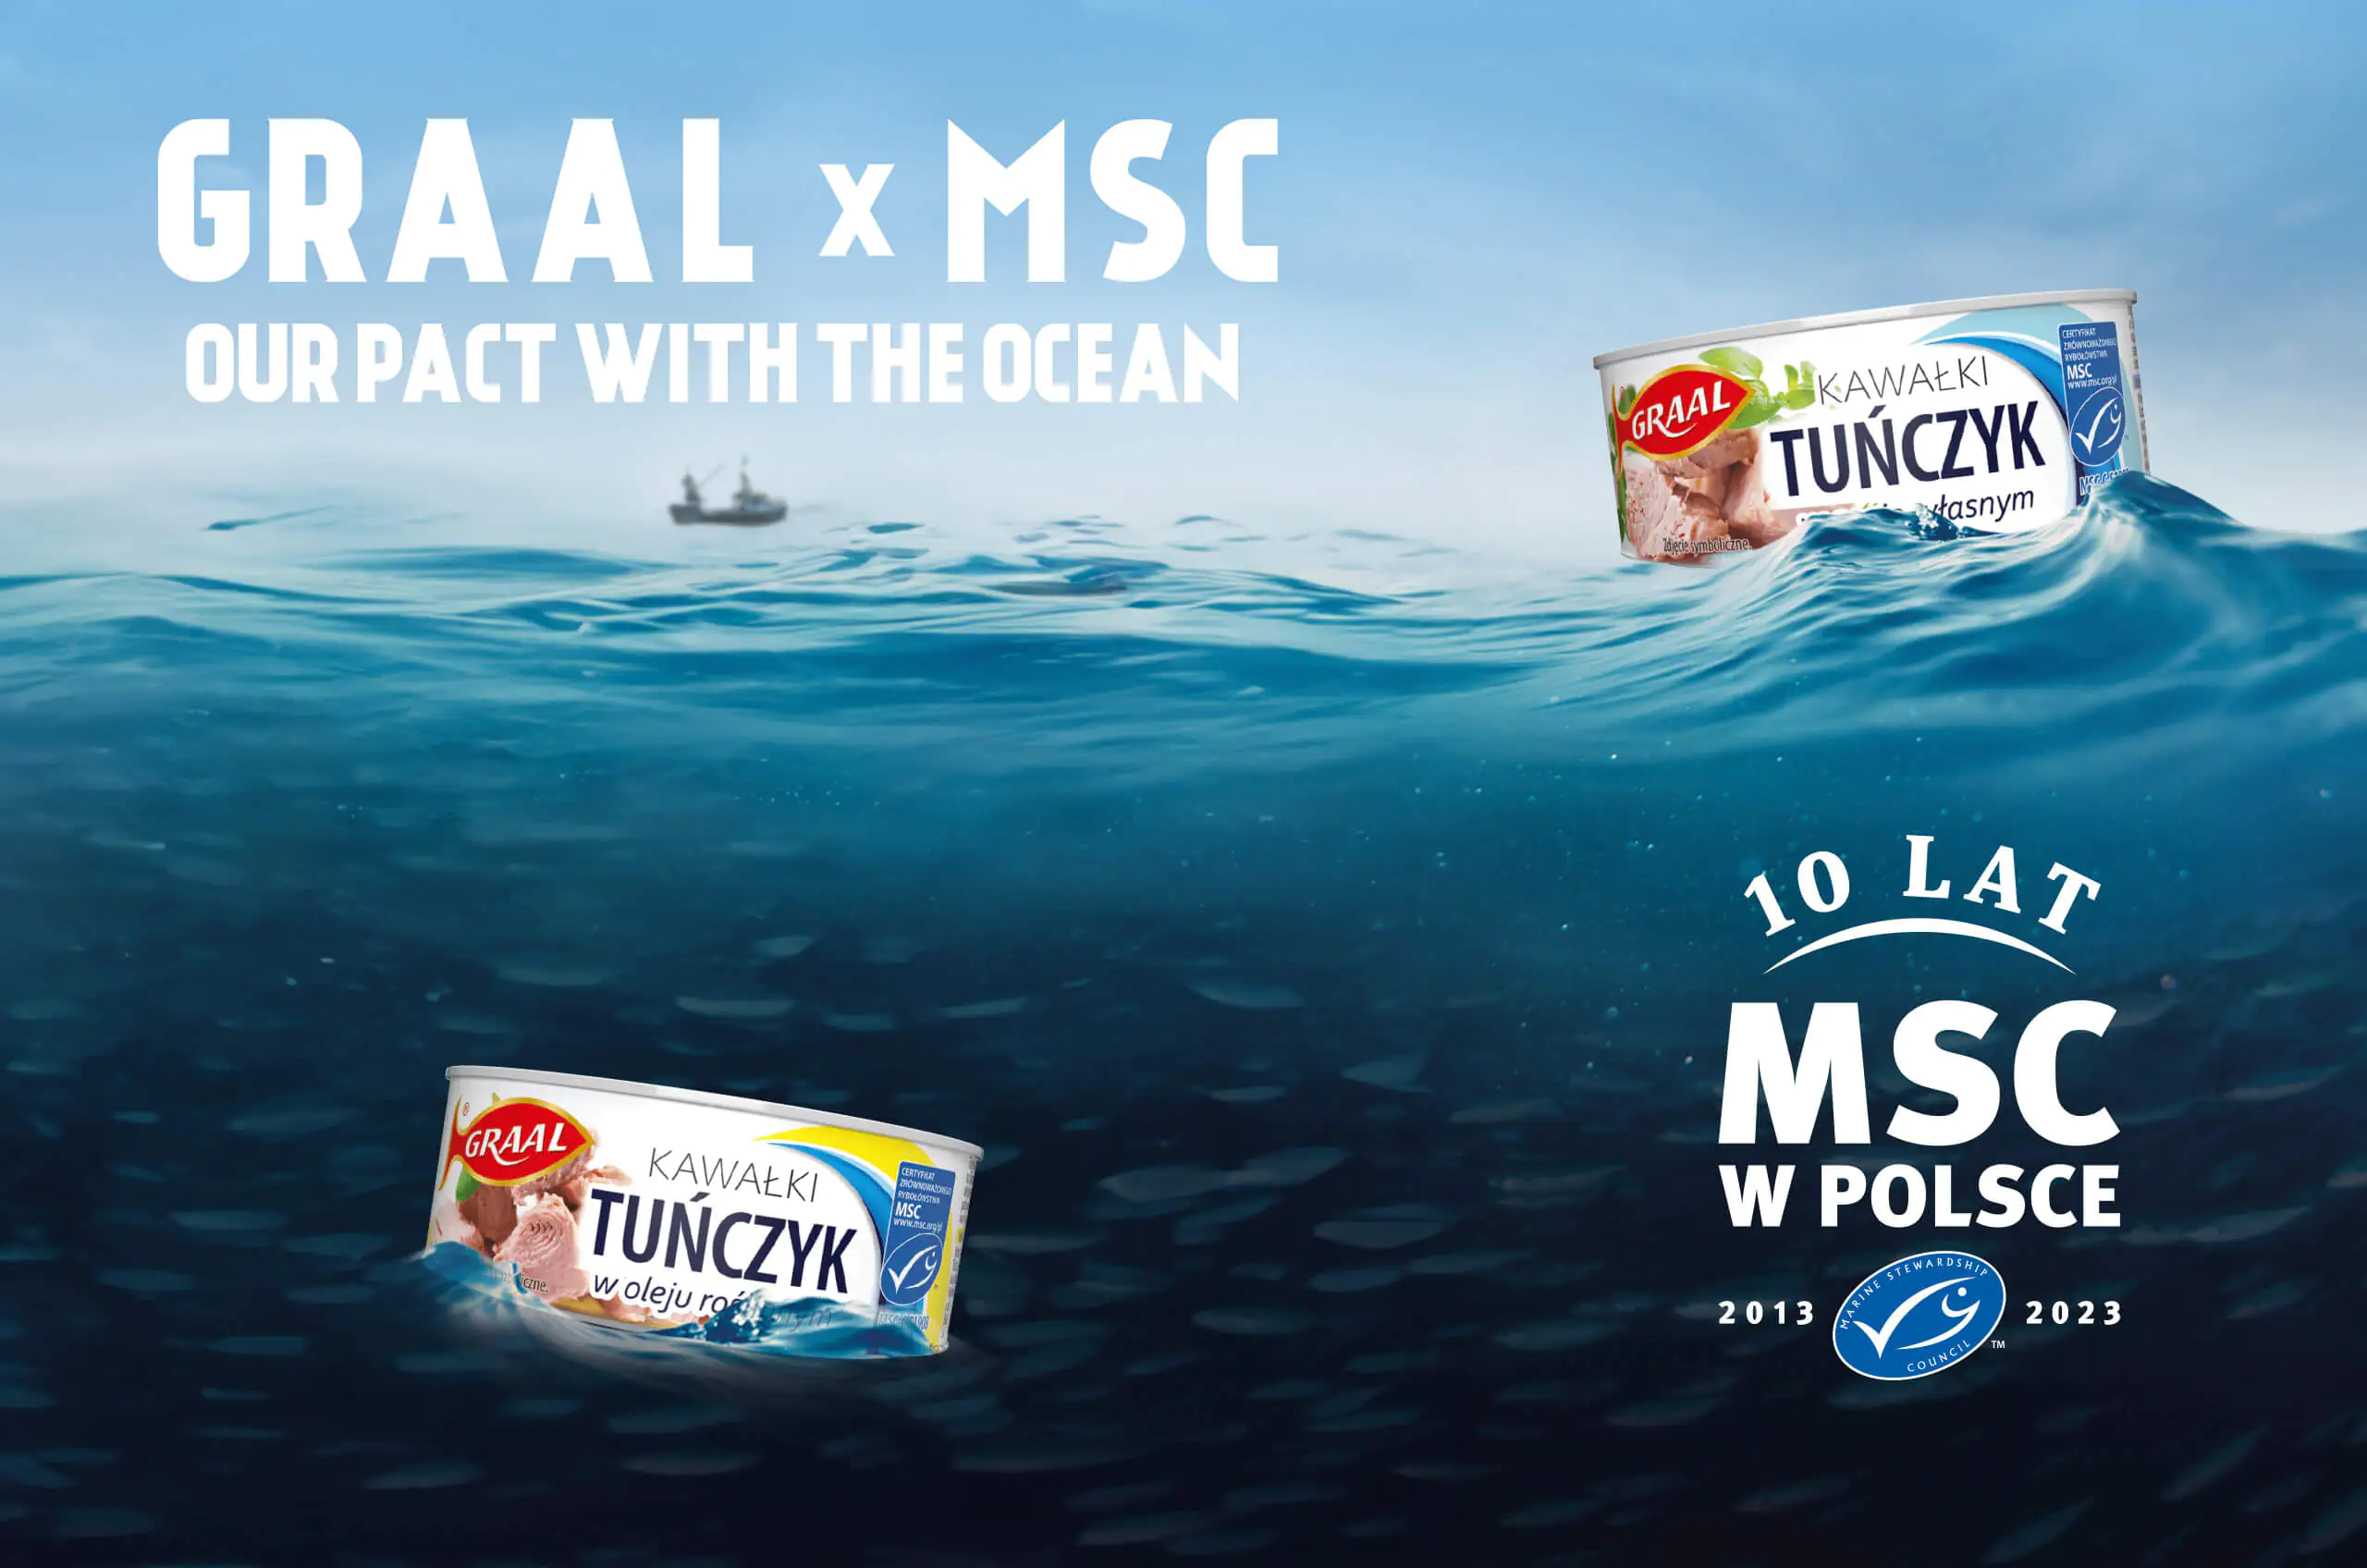 Graal & MSC. Our pact with the ocean